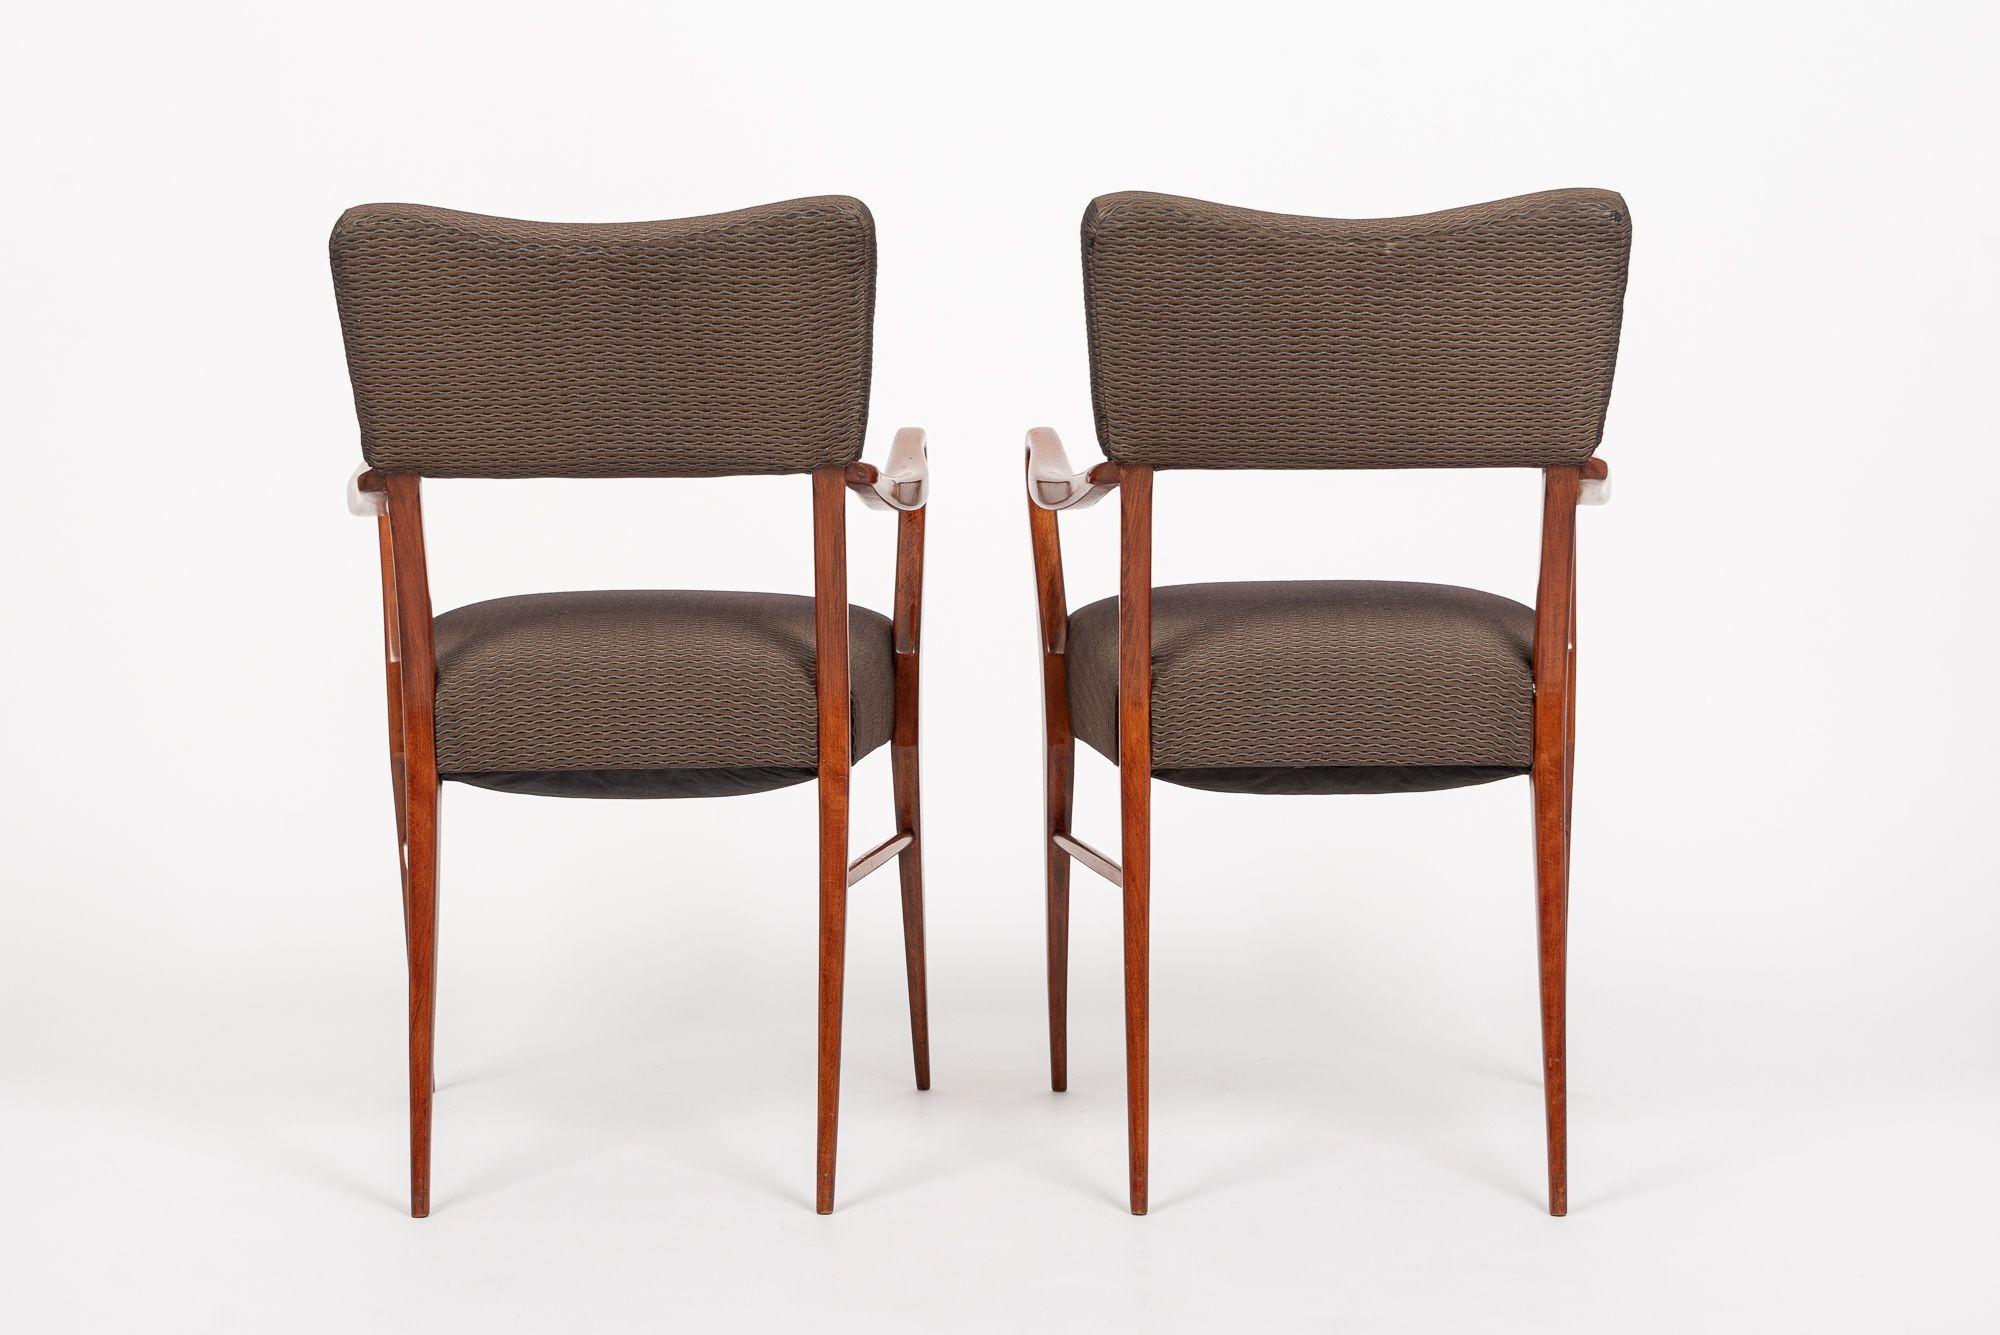 Upholstery Pair of Mid Century Wood & Brown Upholstered Arm Chairs 1950s For Sale